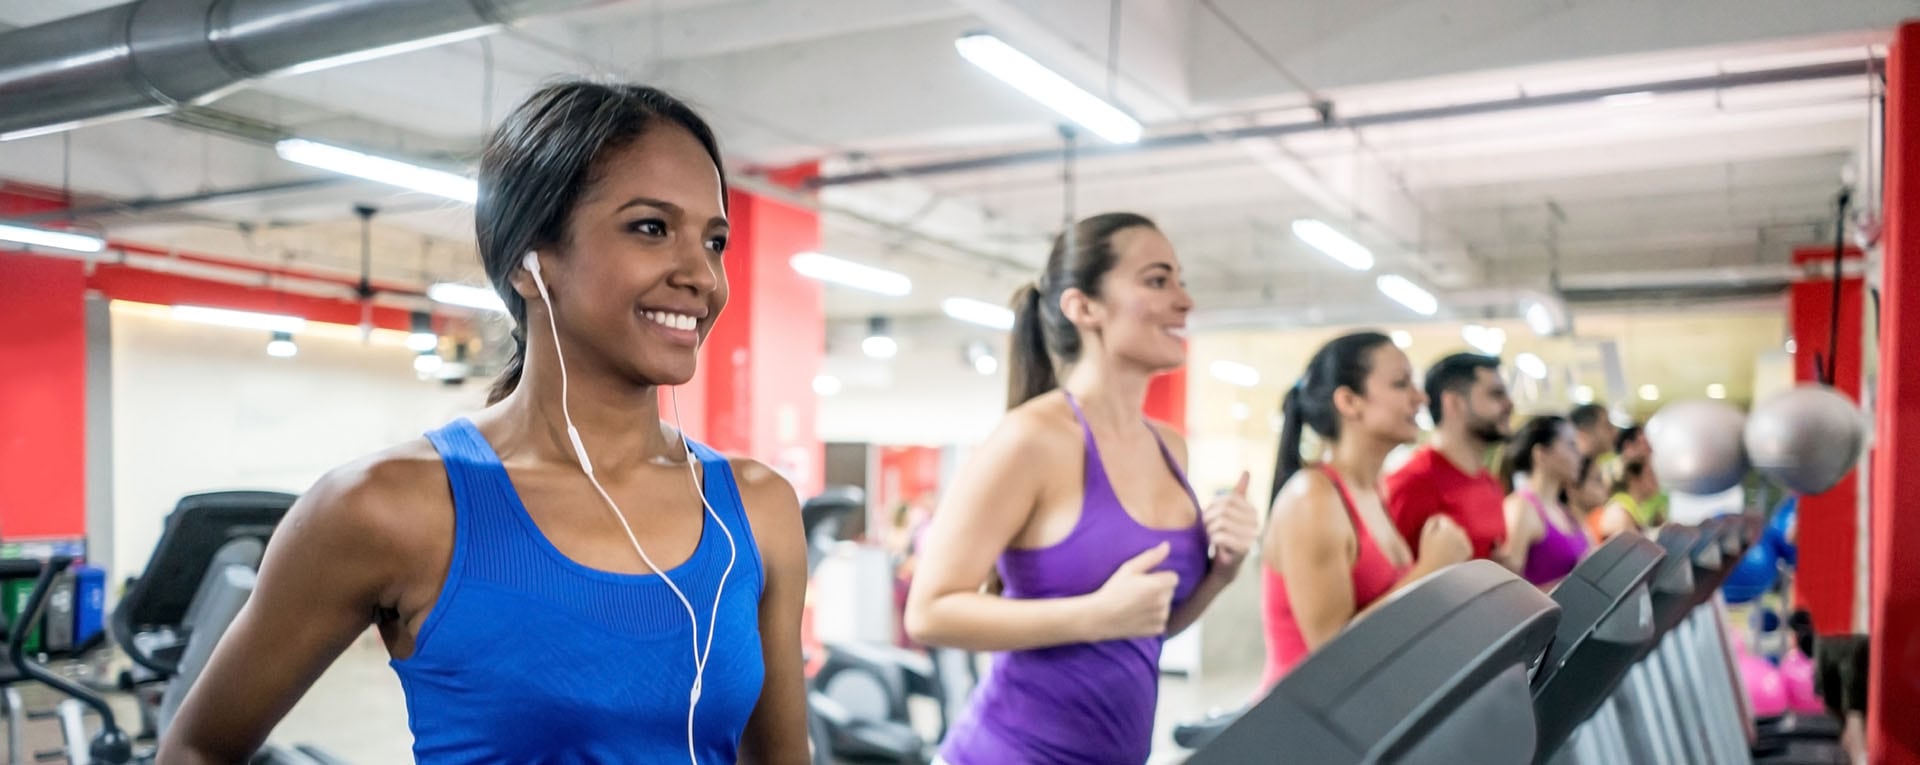 group of bright fit people running on treadmills, listening to music with earbuds